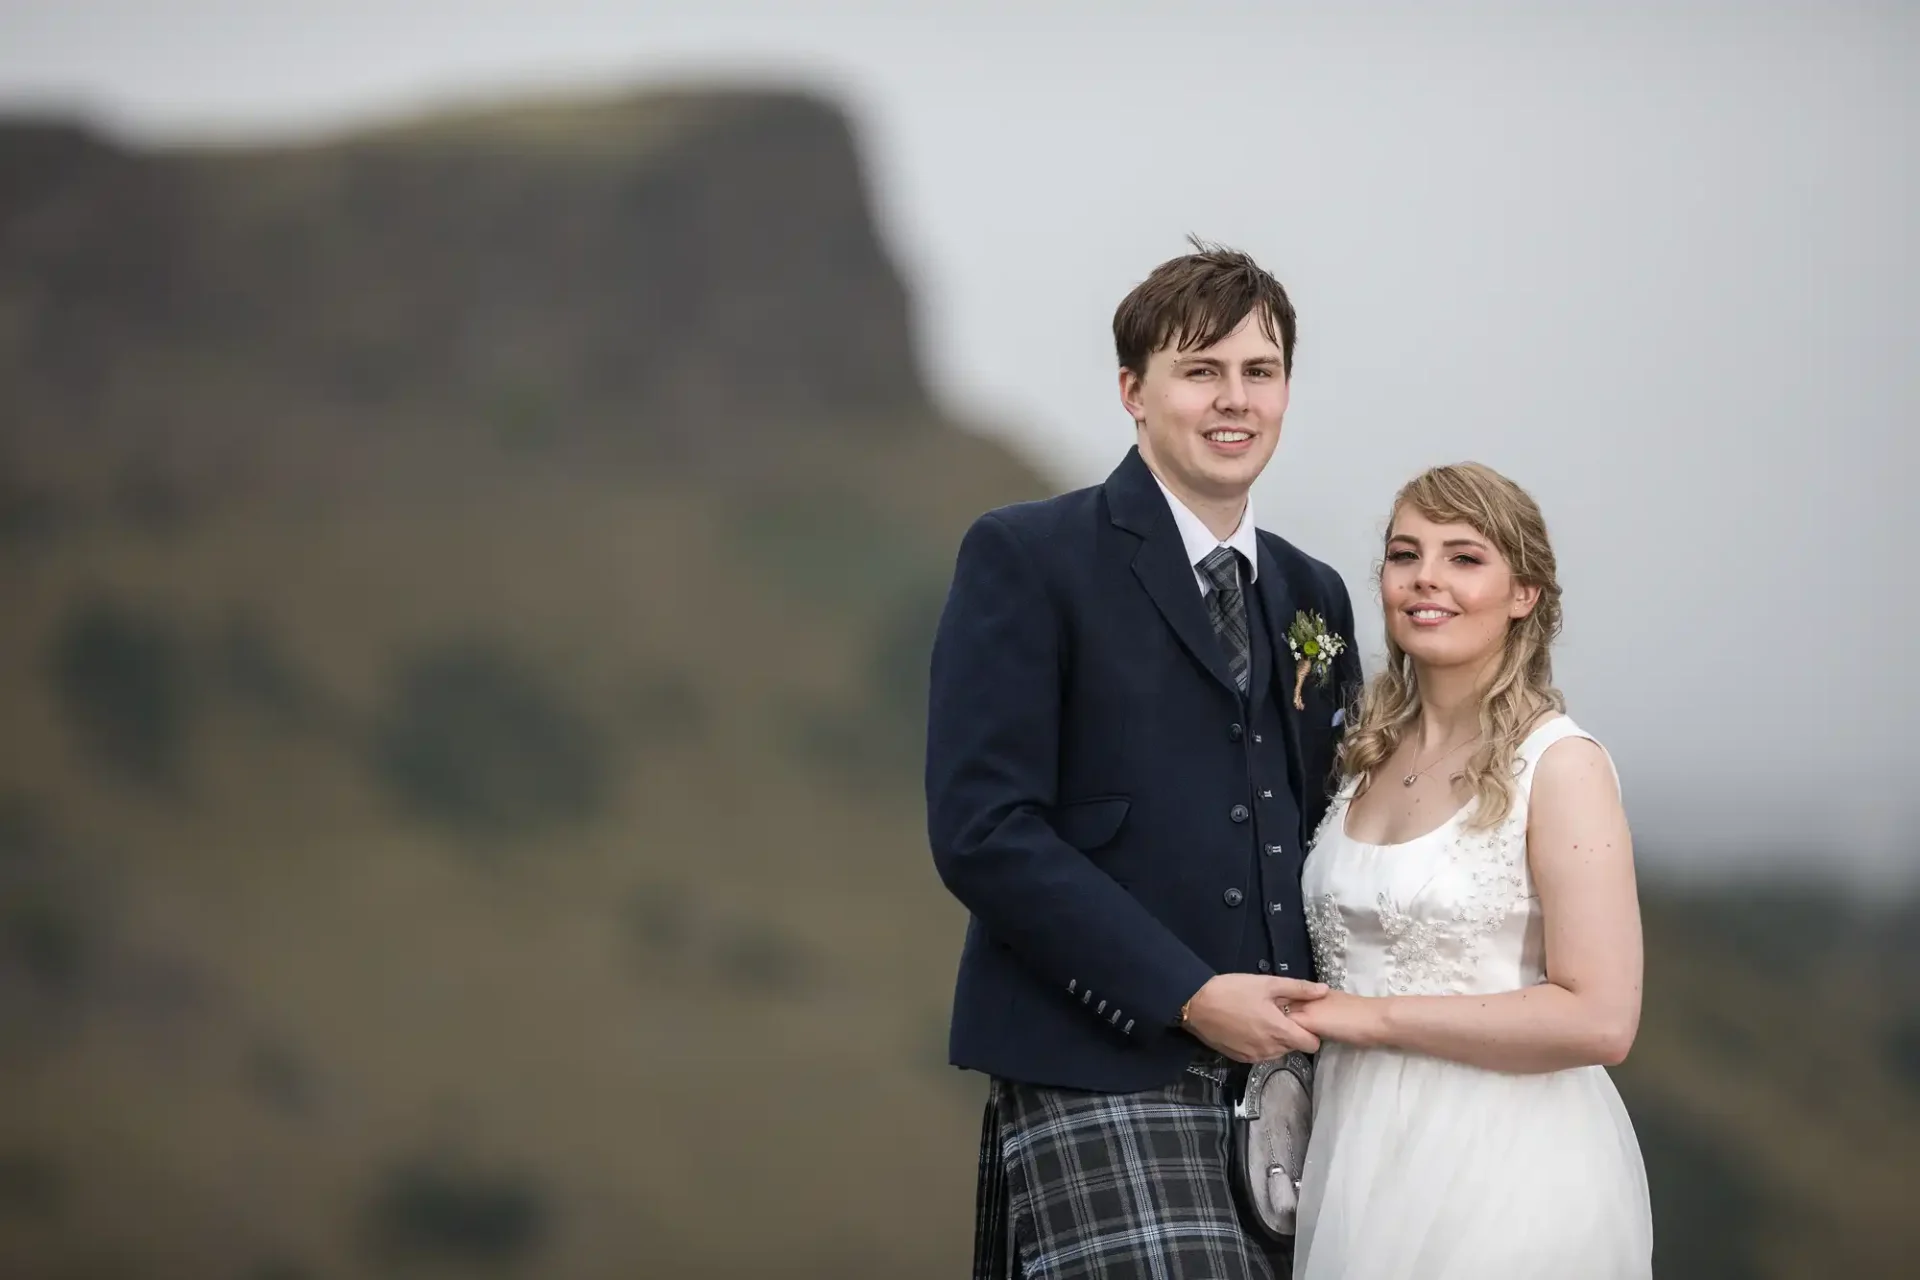 A bride and groom in formal attire smiling outdoors with a misty hill in the background.